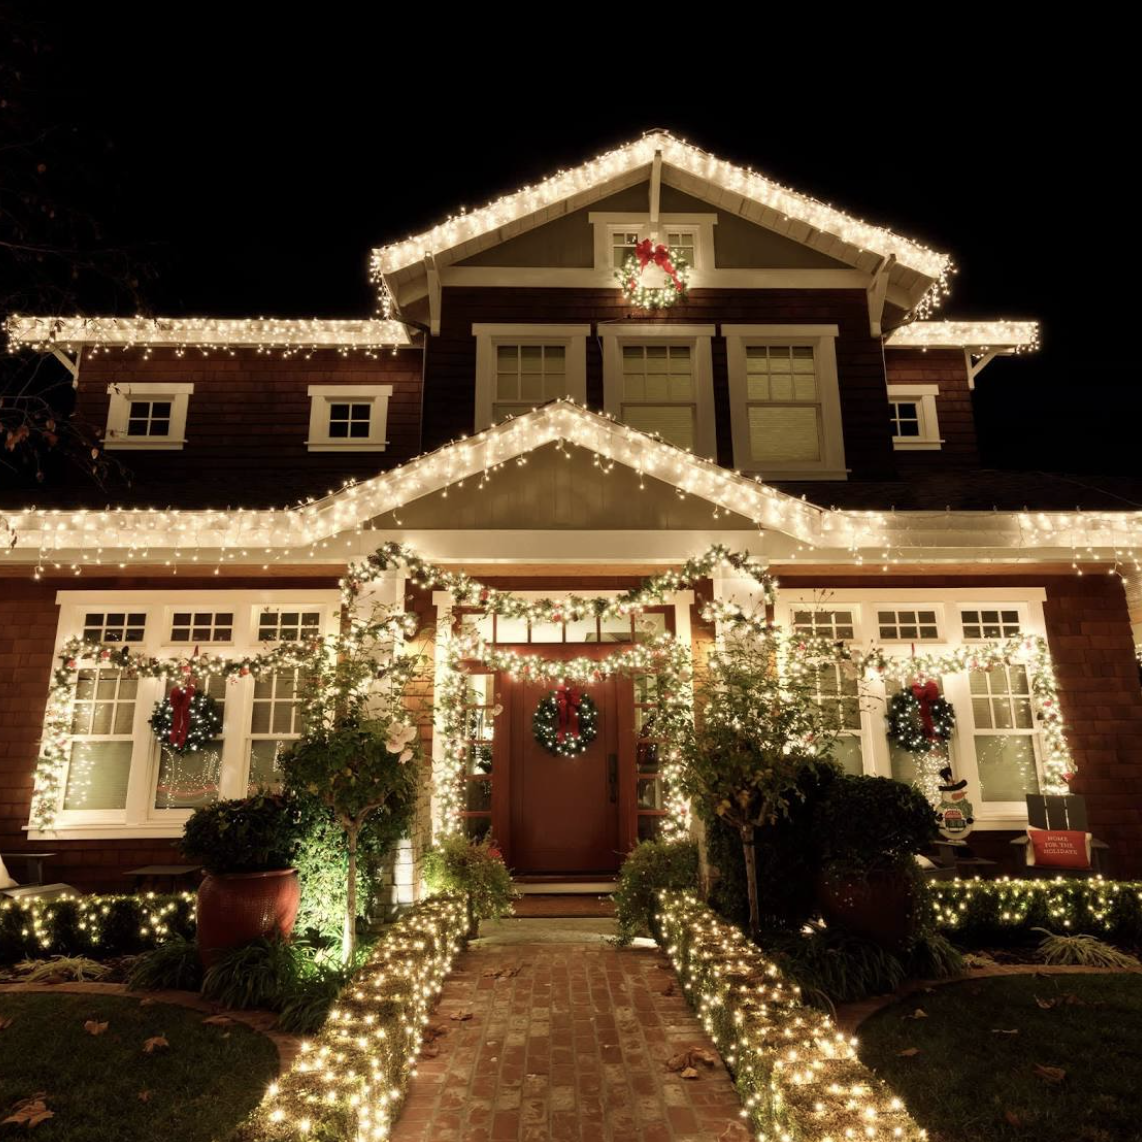 When should we be decorating for Christmas?